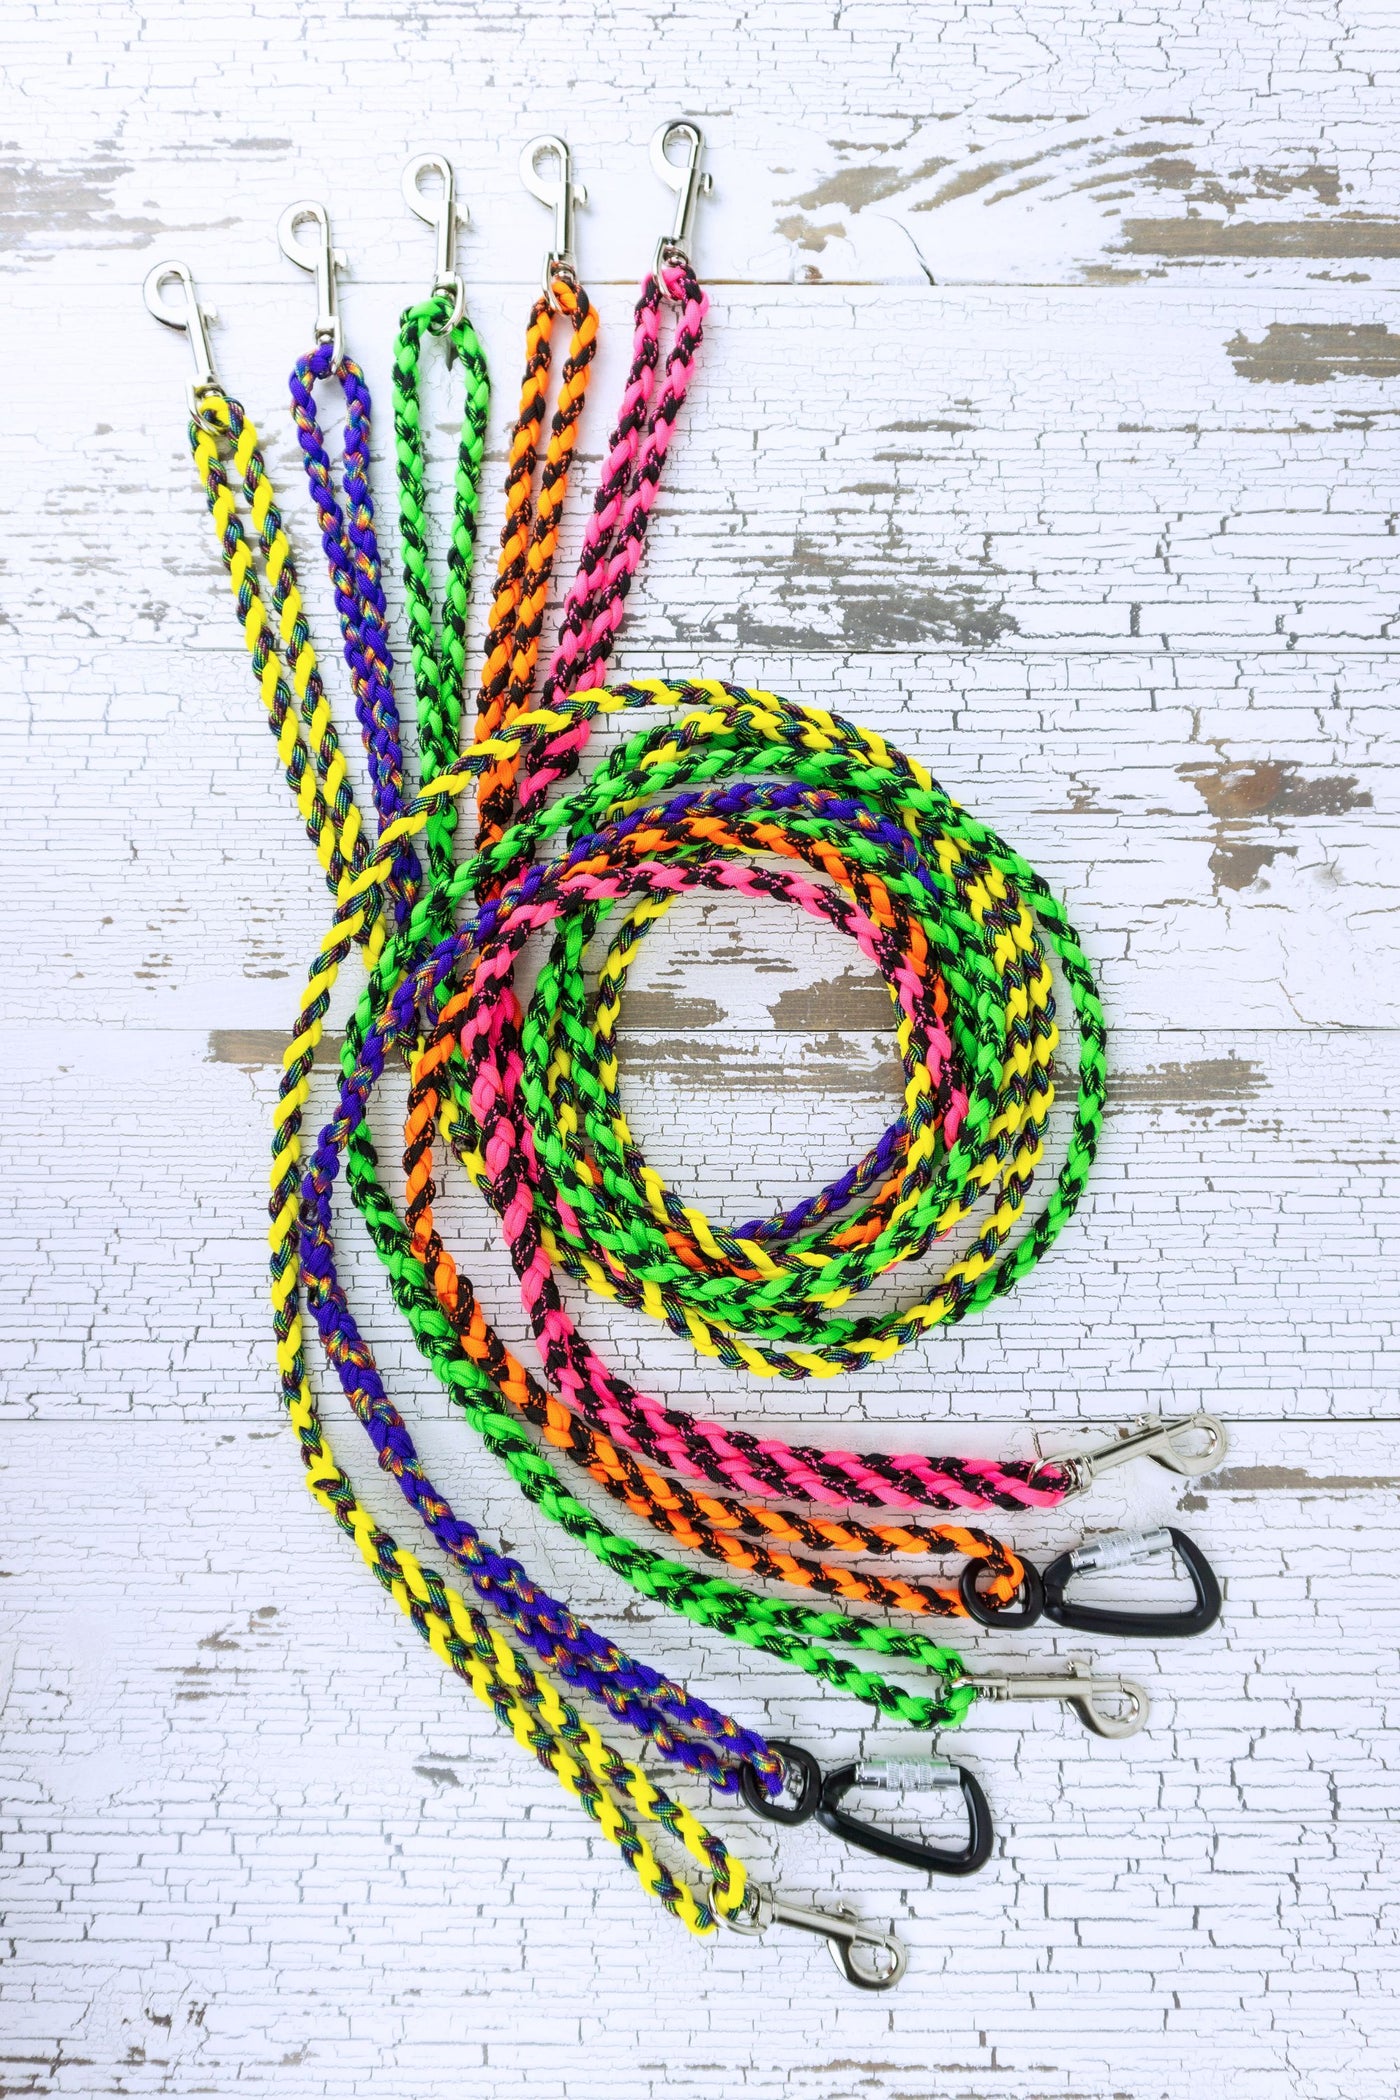 Five different paracord leashes in the two color options of neon yellow and rainbow, purple and rainbow, neon green and black, neon orange and black, and neon pink and black. Leashes are in a swirled flat lay, showing loop handles at each end and two styles of hardware.